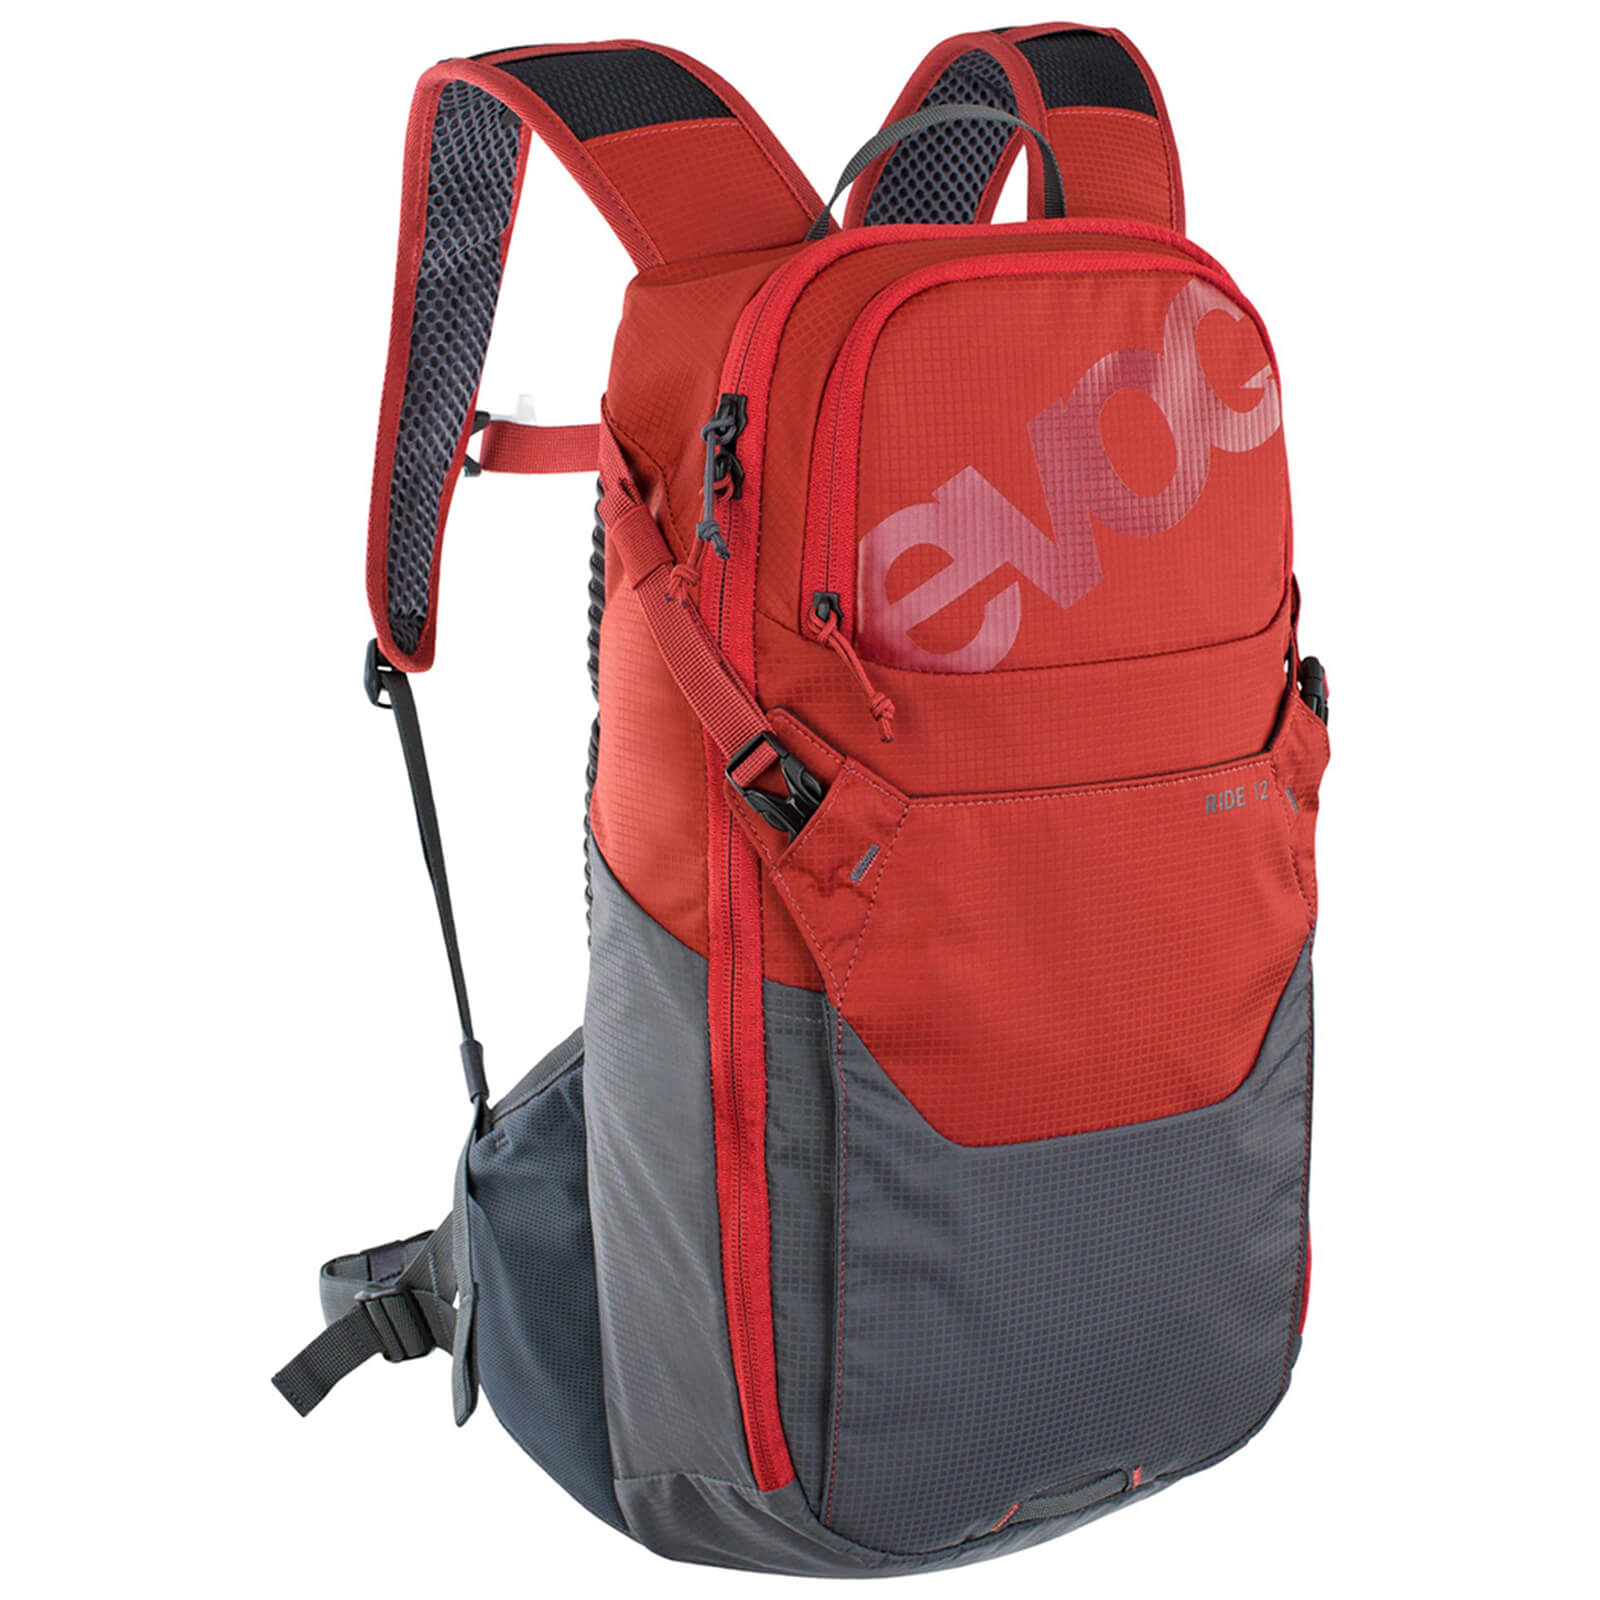 Evoc Ride 12L Hydration Pack + 2L - Chili Red/Carbon Grey